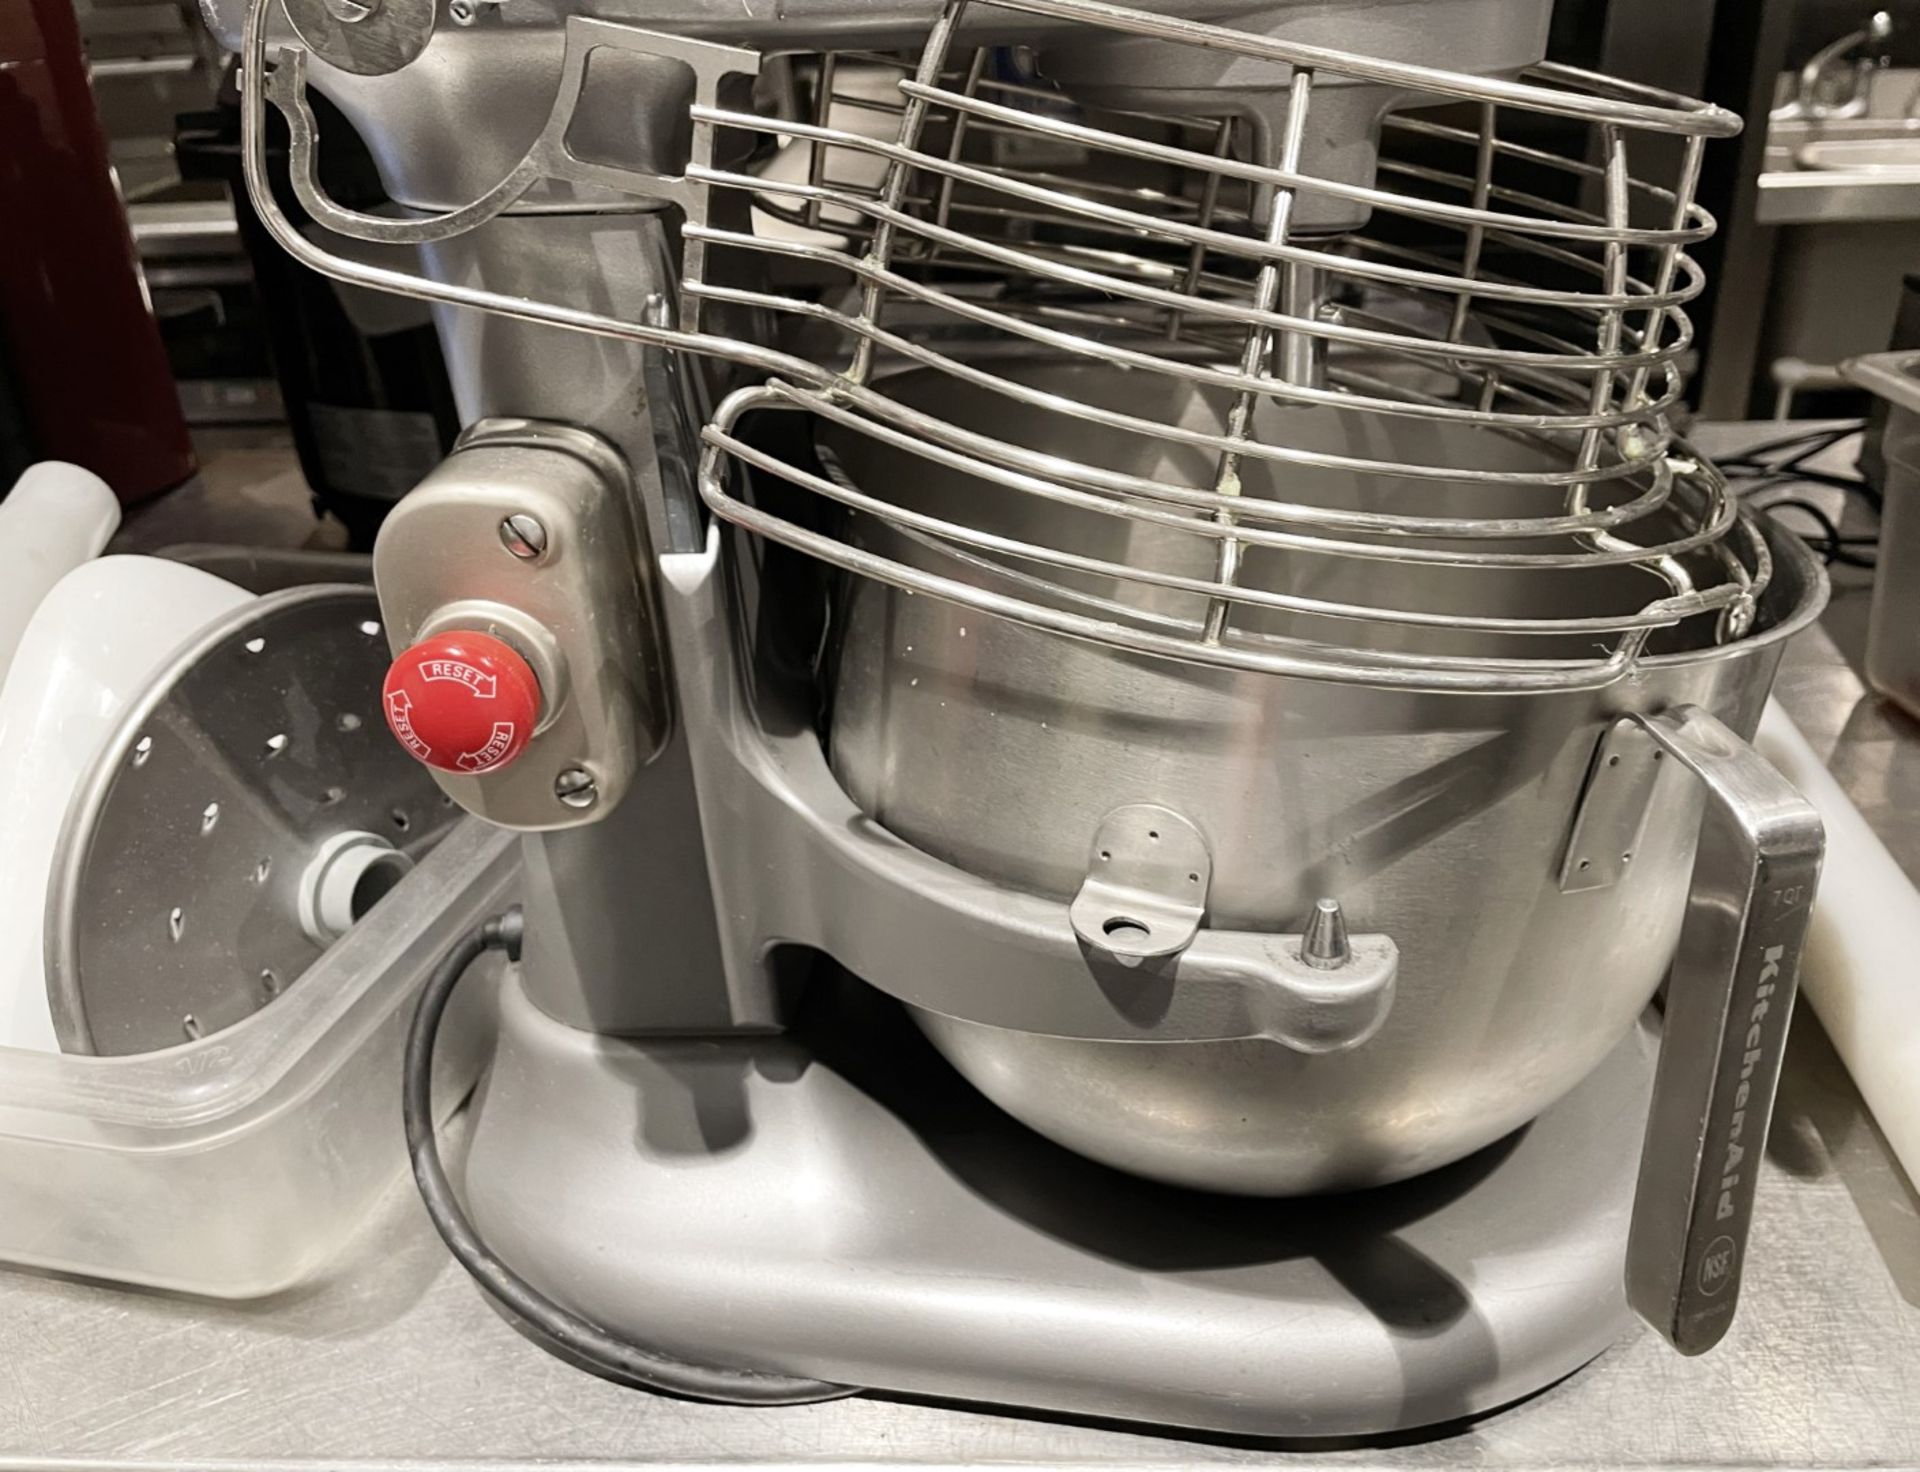 1 x Kitchenaid 6.9 Ltr Commercial Planetary Food Mixer - Model 5KSM7990XBSL - Includes Mixing Bowl - Image 11 of 16